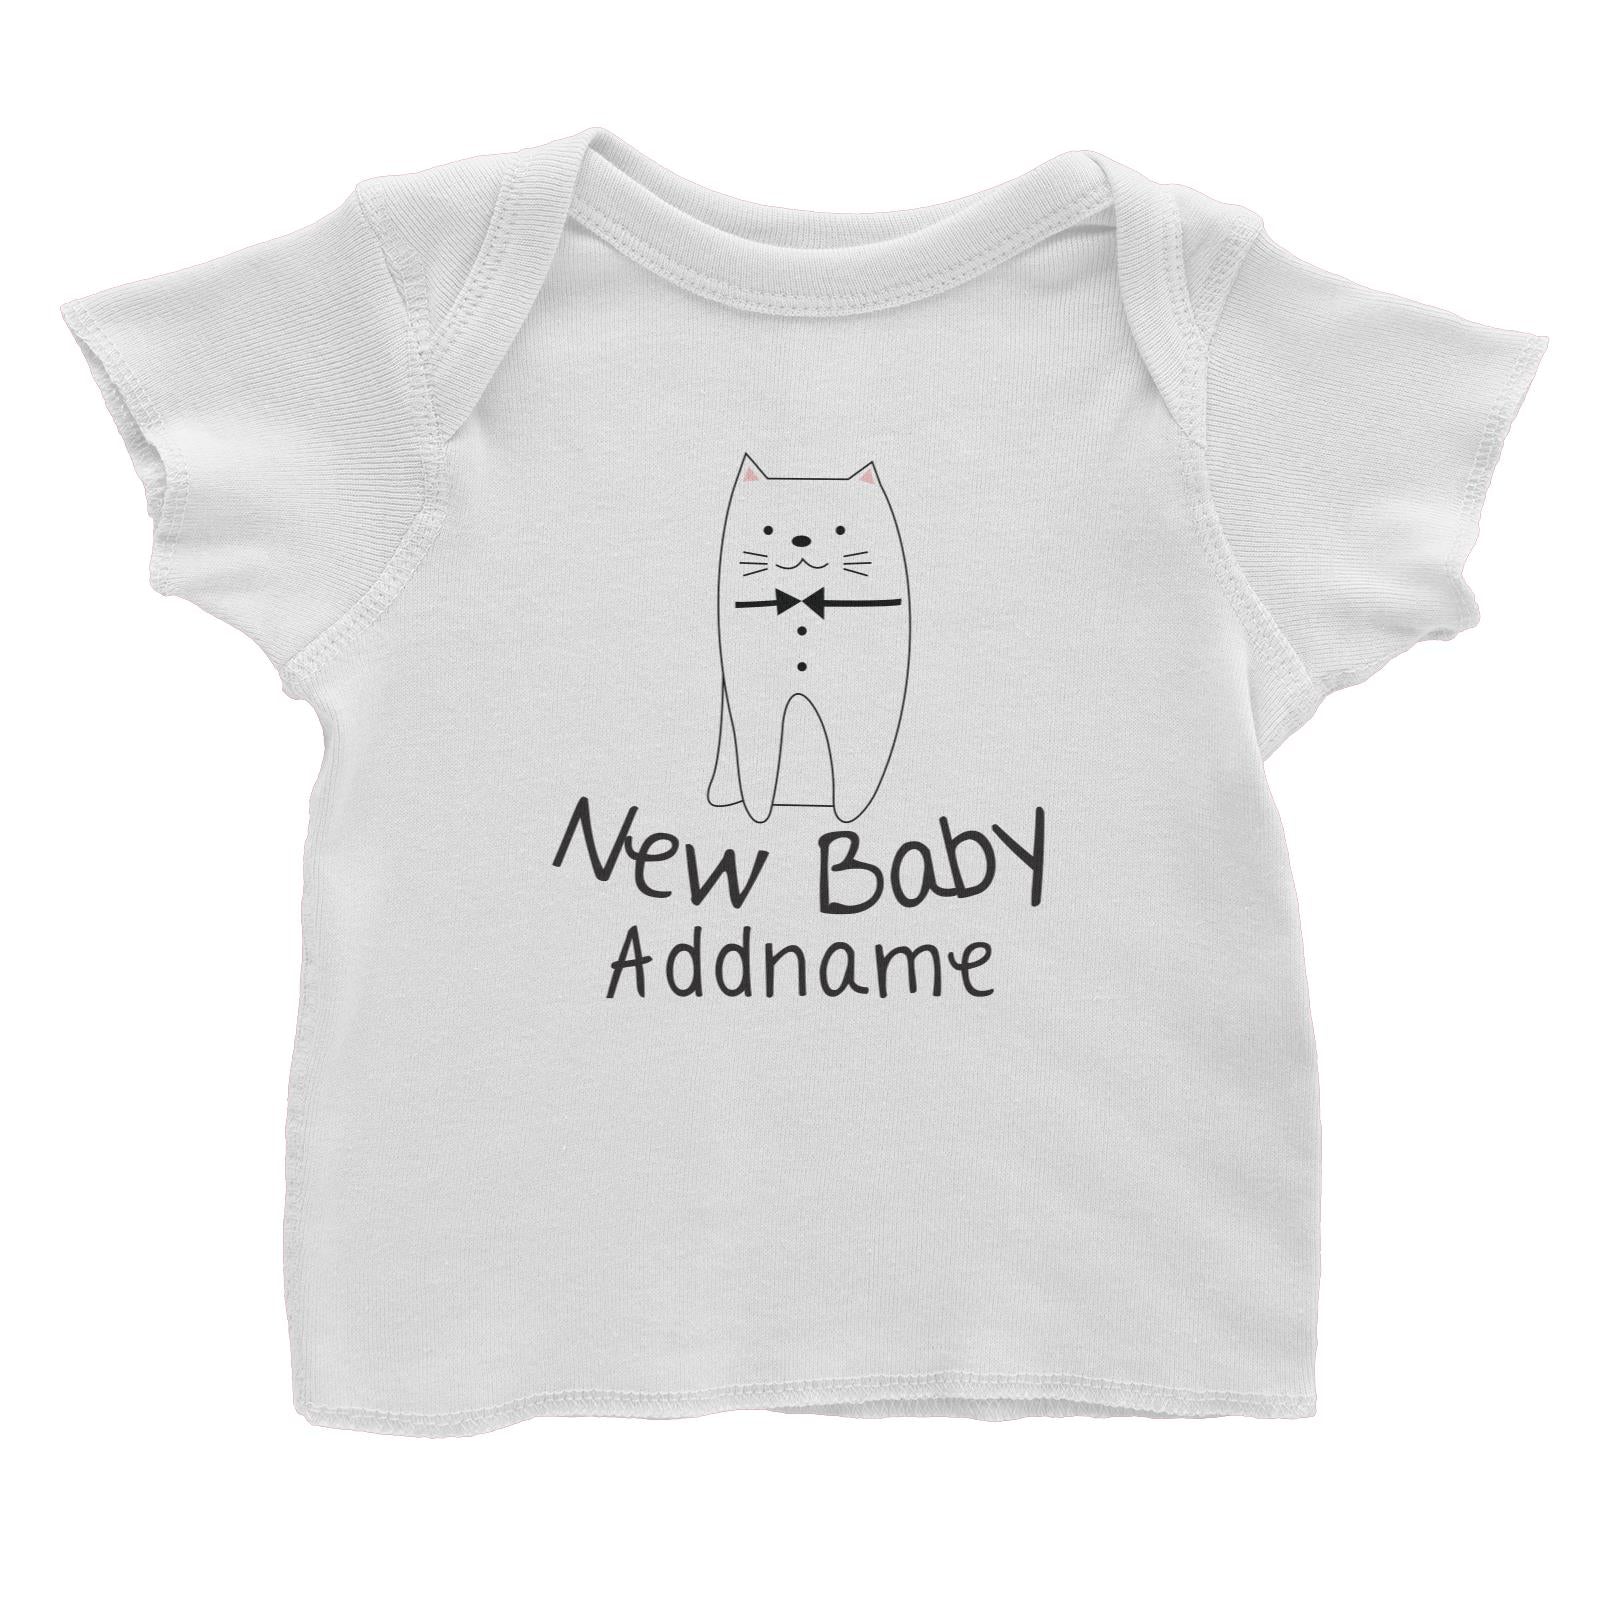 Cute Animals and Friends Series 2 Cat New Baby Addname Baby T-Shirt